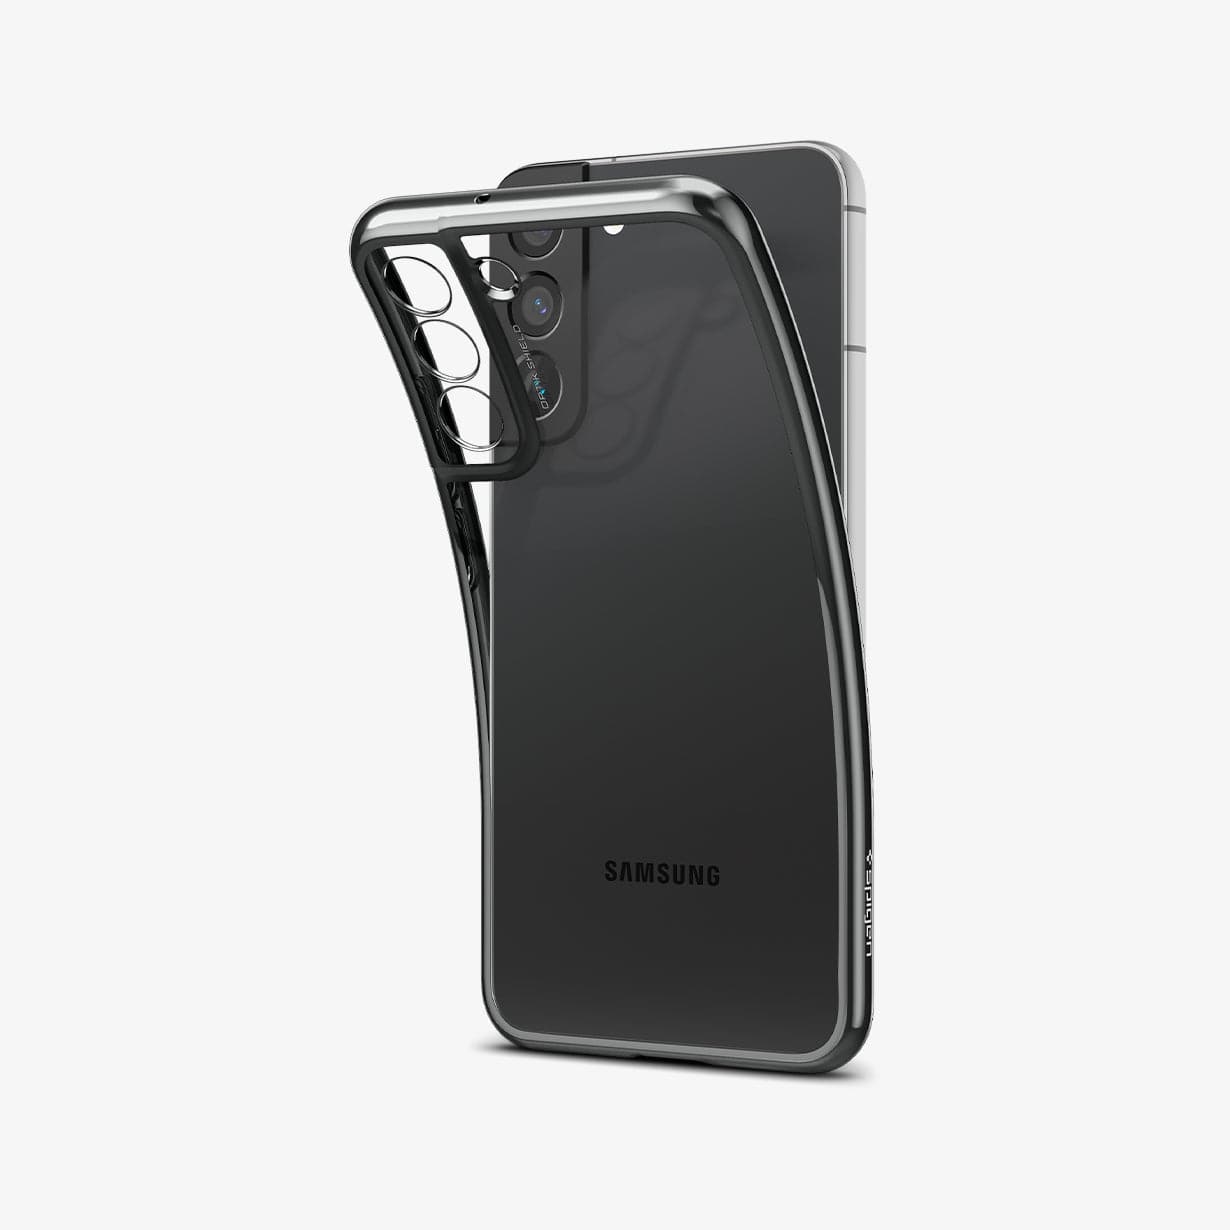 ACS03965 - Galaxy S22 Plus 5G Case Optik Crystal in chrome gray showing the back with case bending away from device to show the flexibility